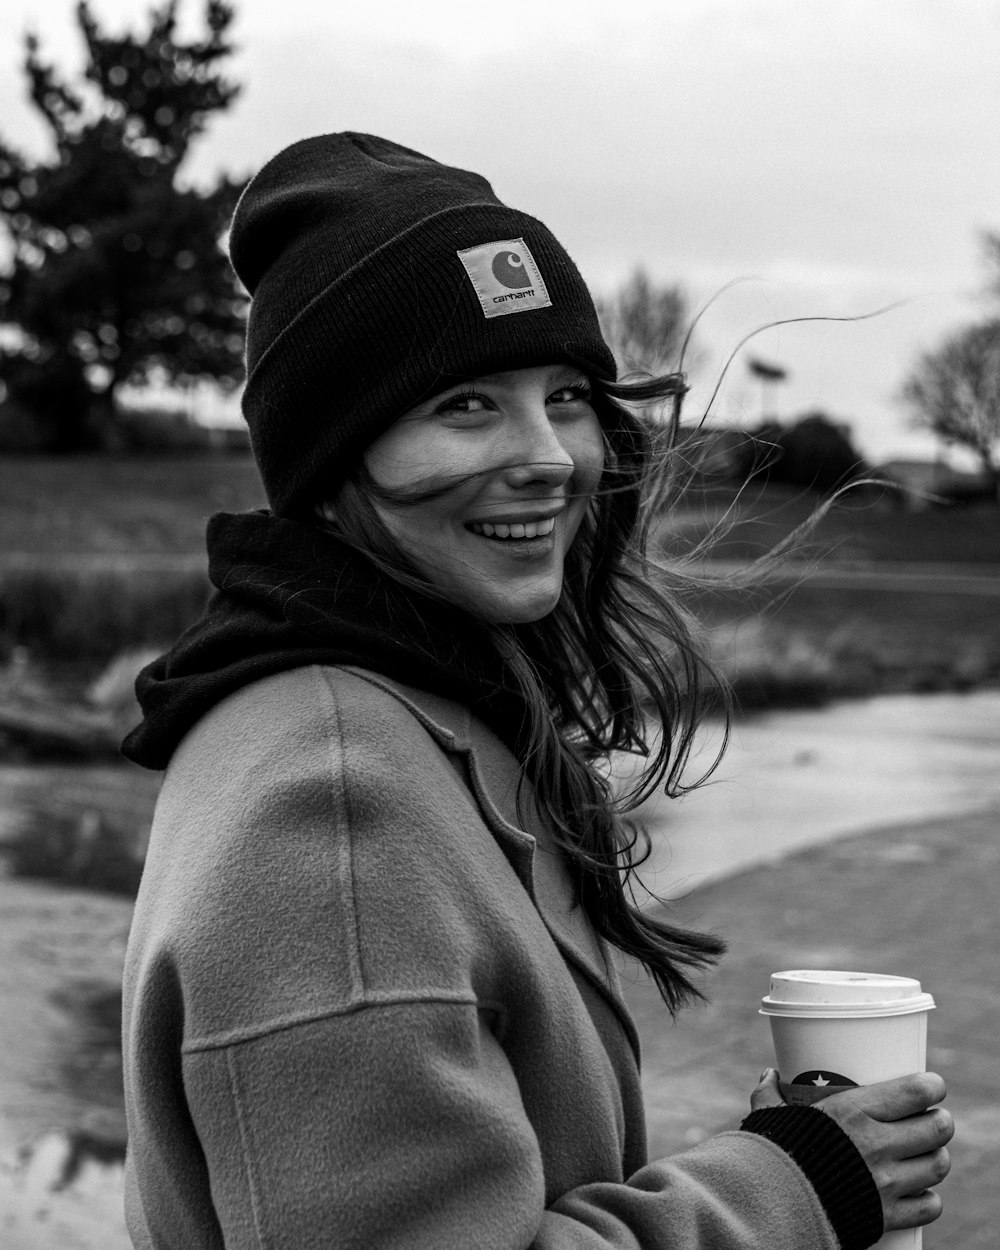 grayscale photo of woman in coat and knit cap smiling